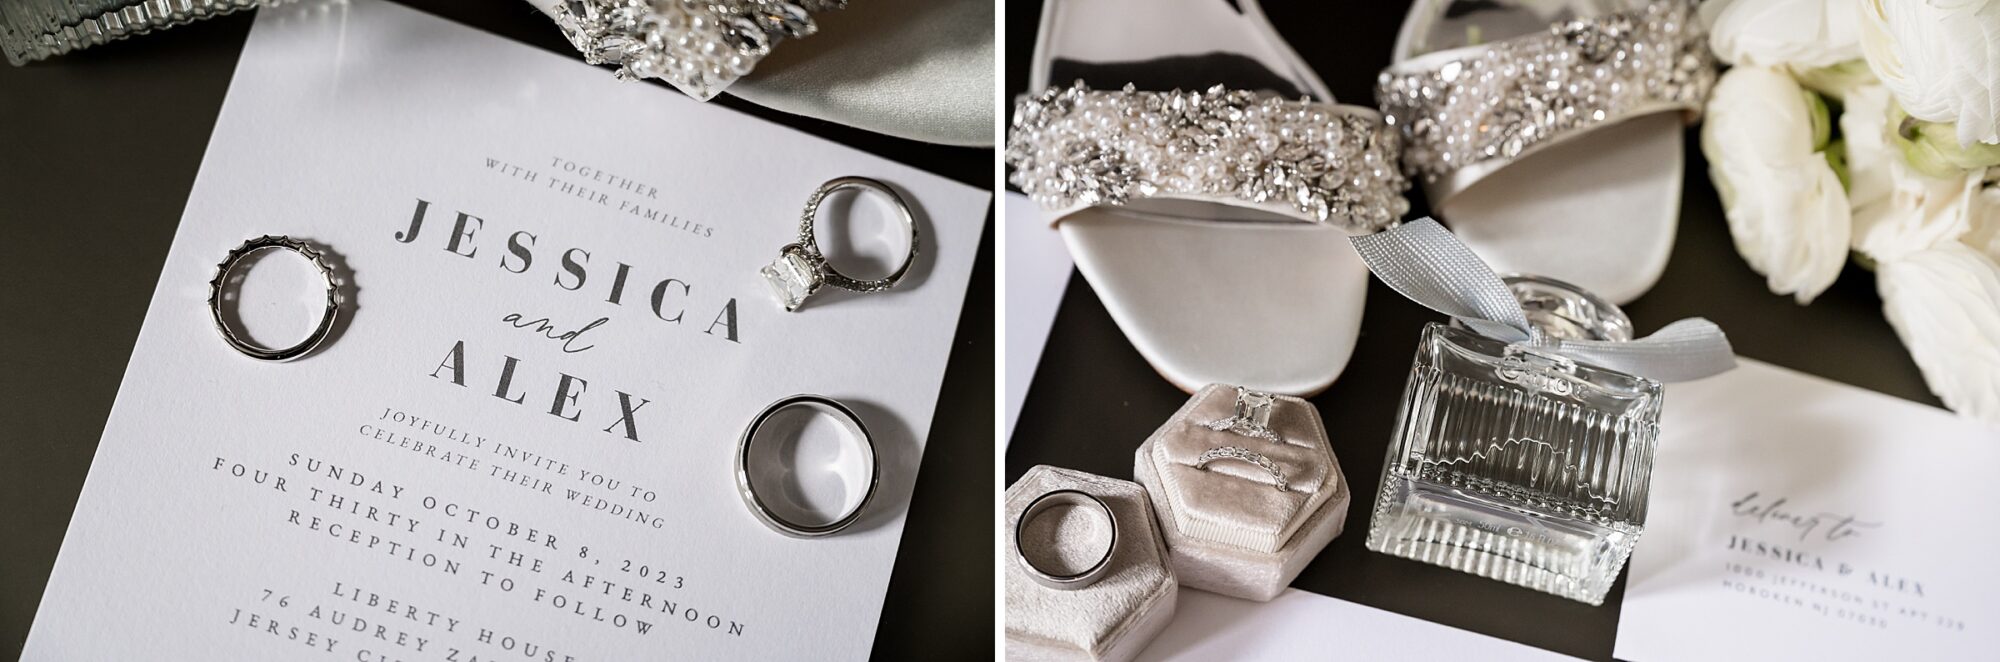 A silver wedding invitation with a pair of shoes and a wedding ring.